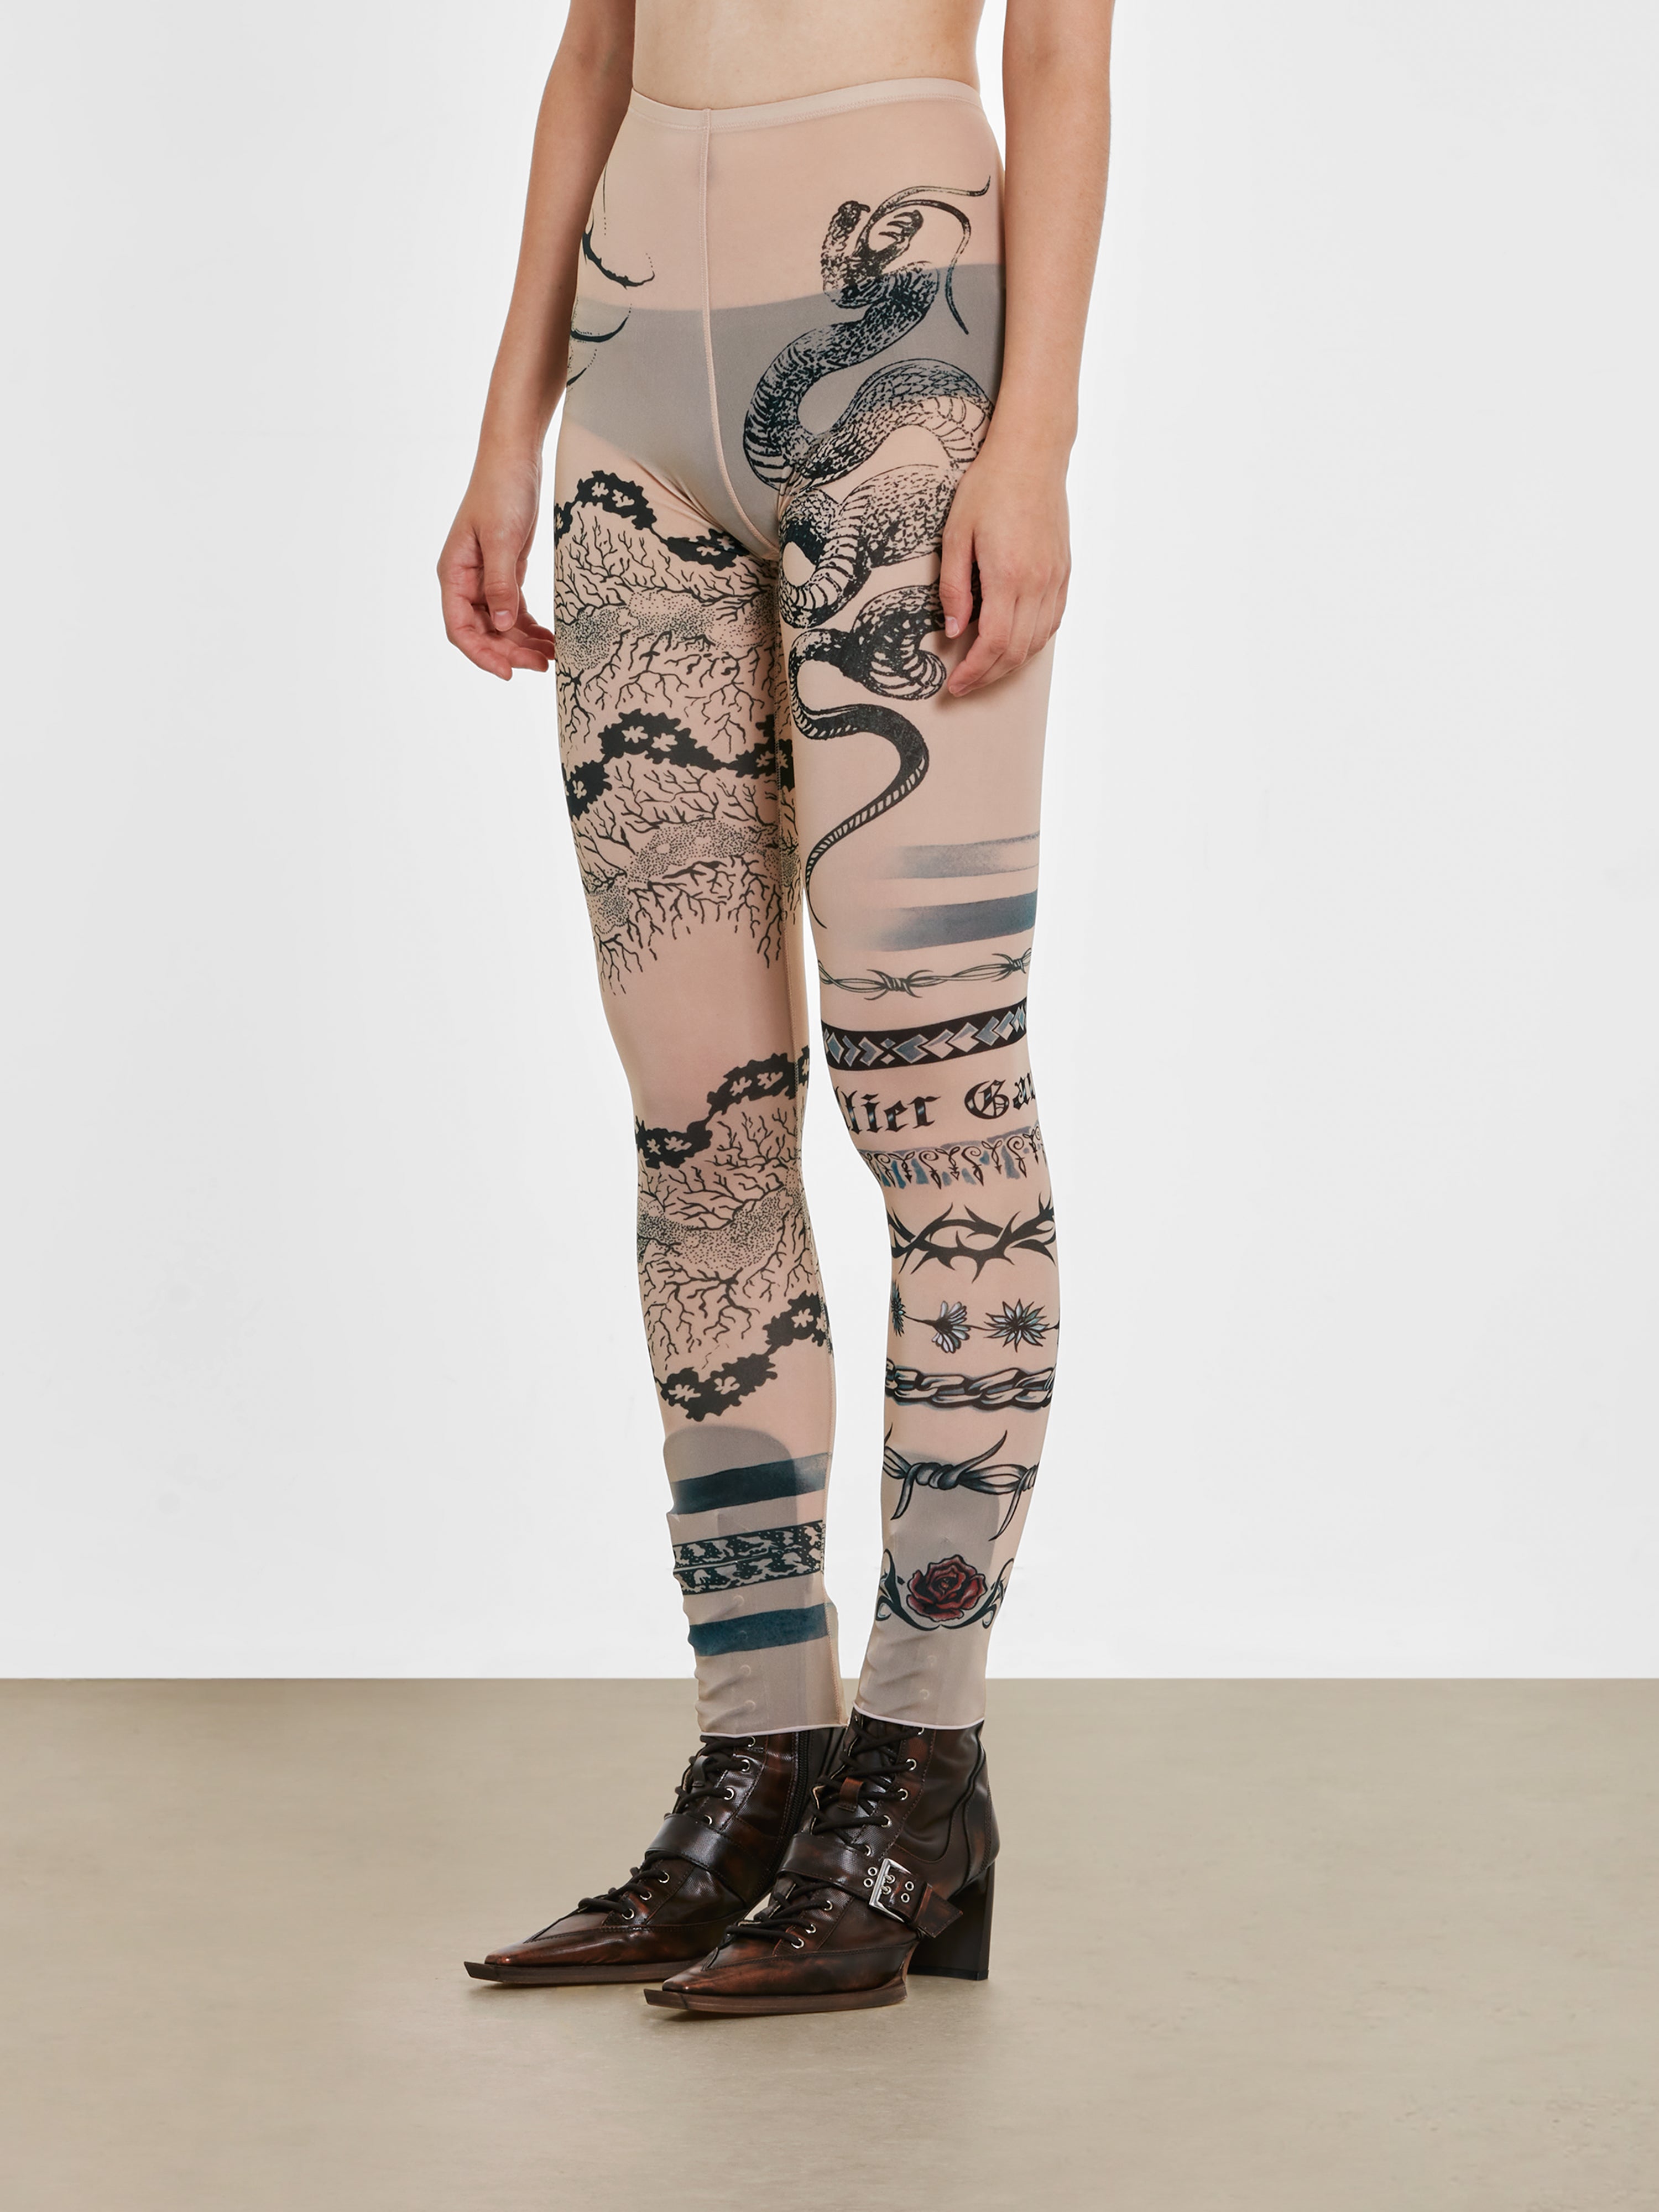 Stop And Stare Cherry Blossom Tights In Stock At UK Tights